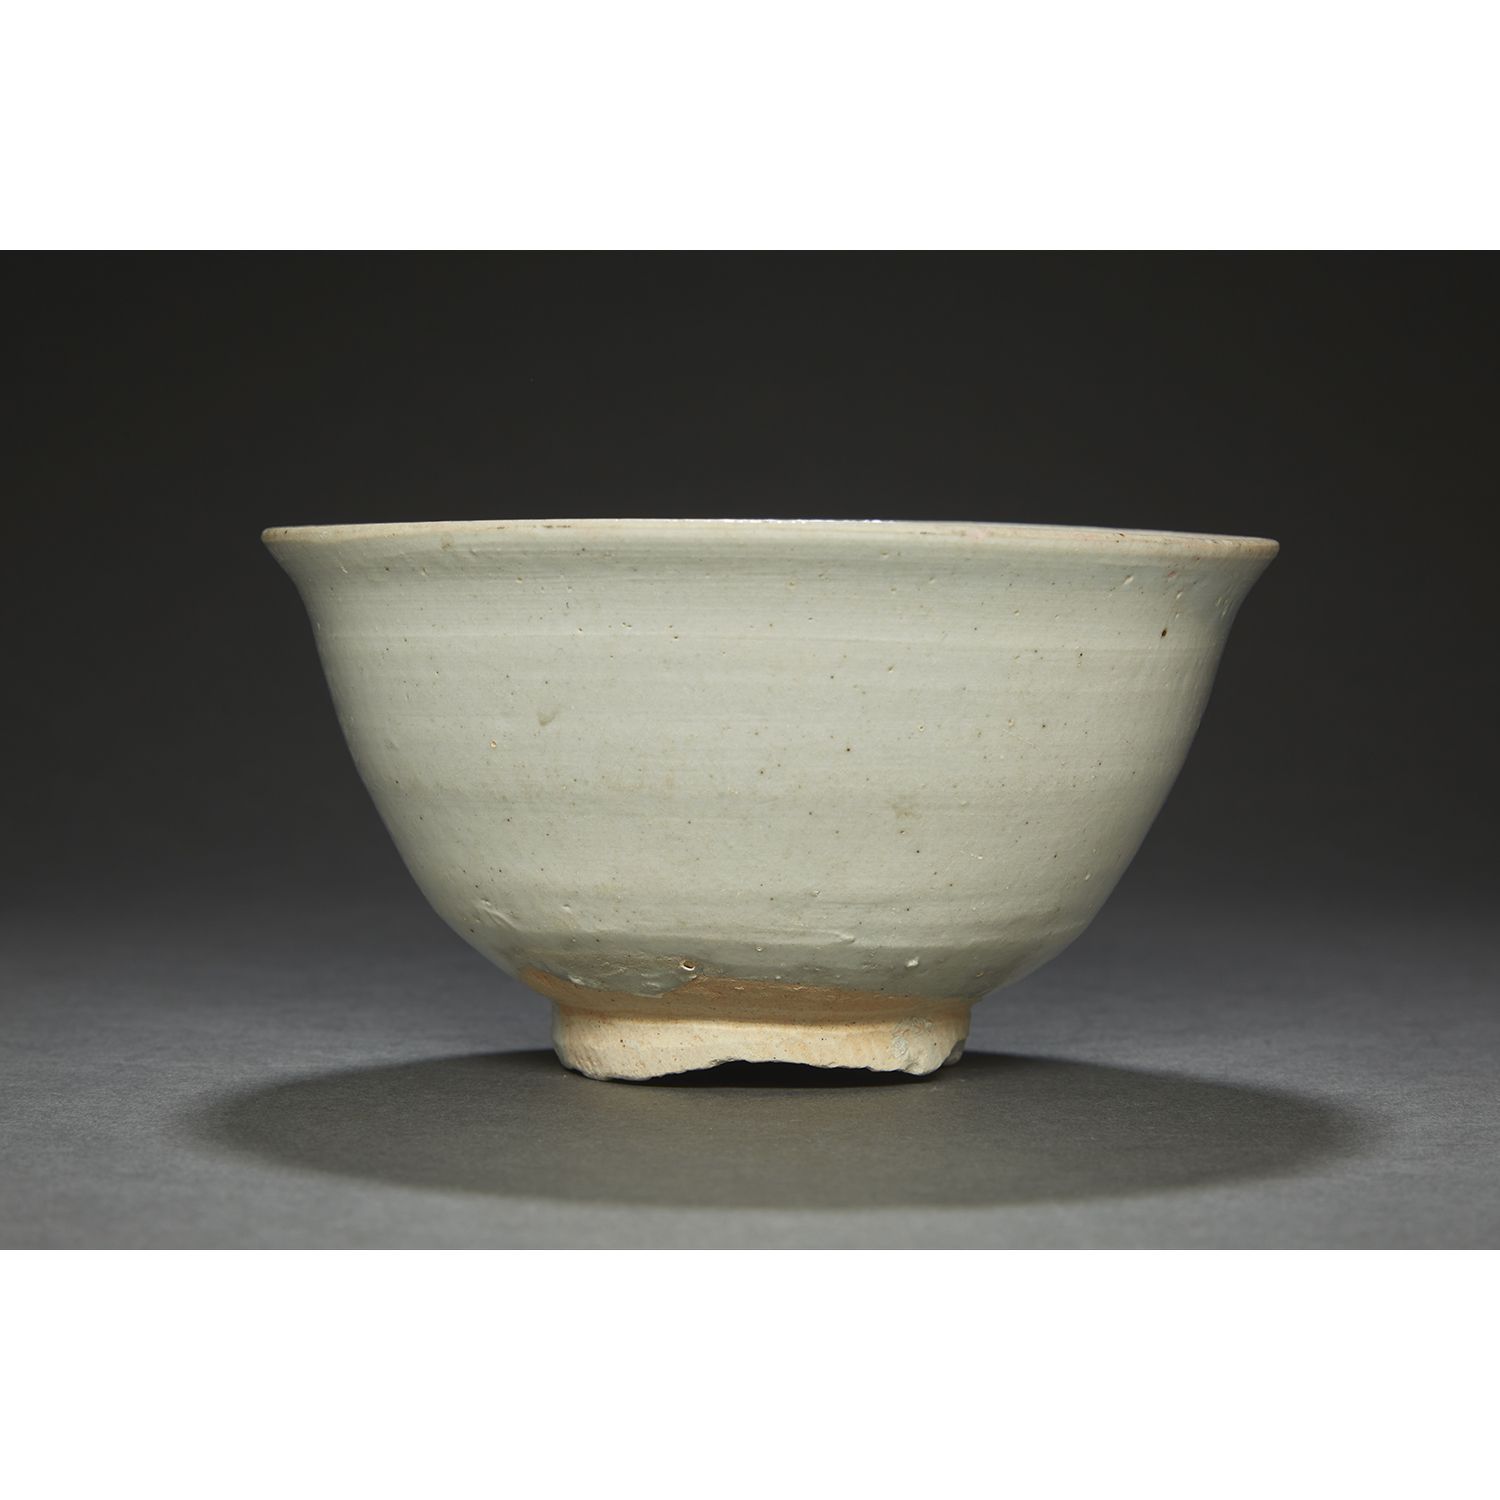 Null BOWL
made of sandstone and olive green enamel. 
Korea, late Choseon period.&hellip;